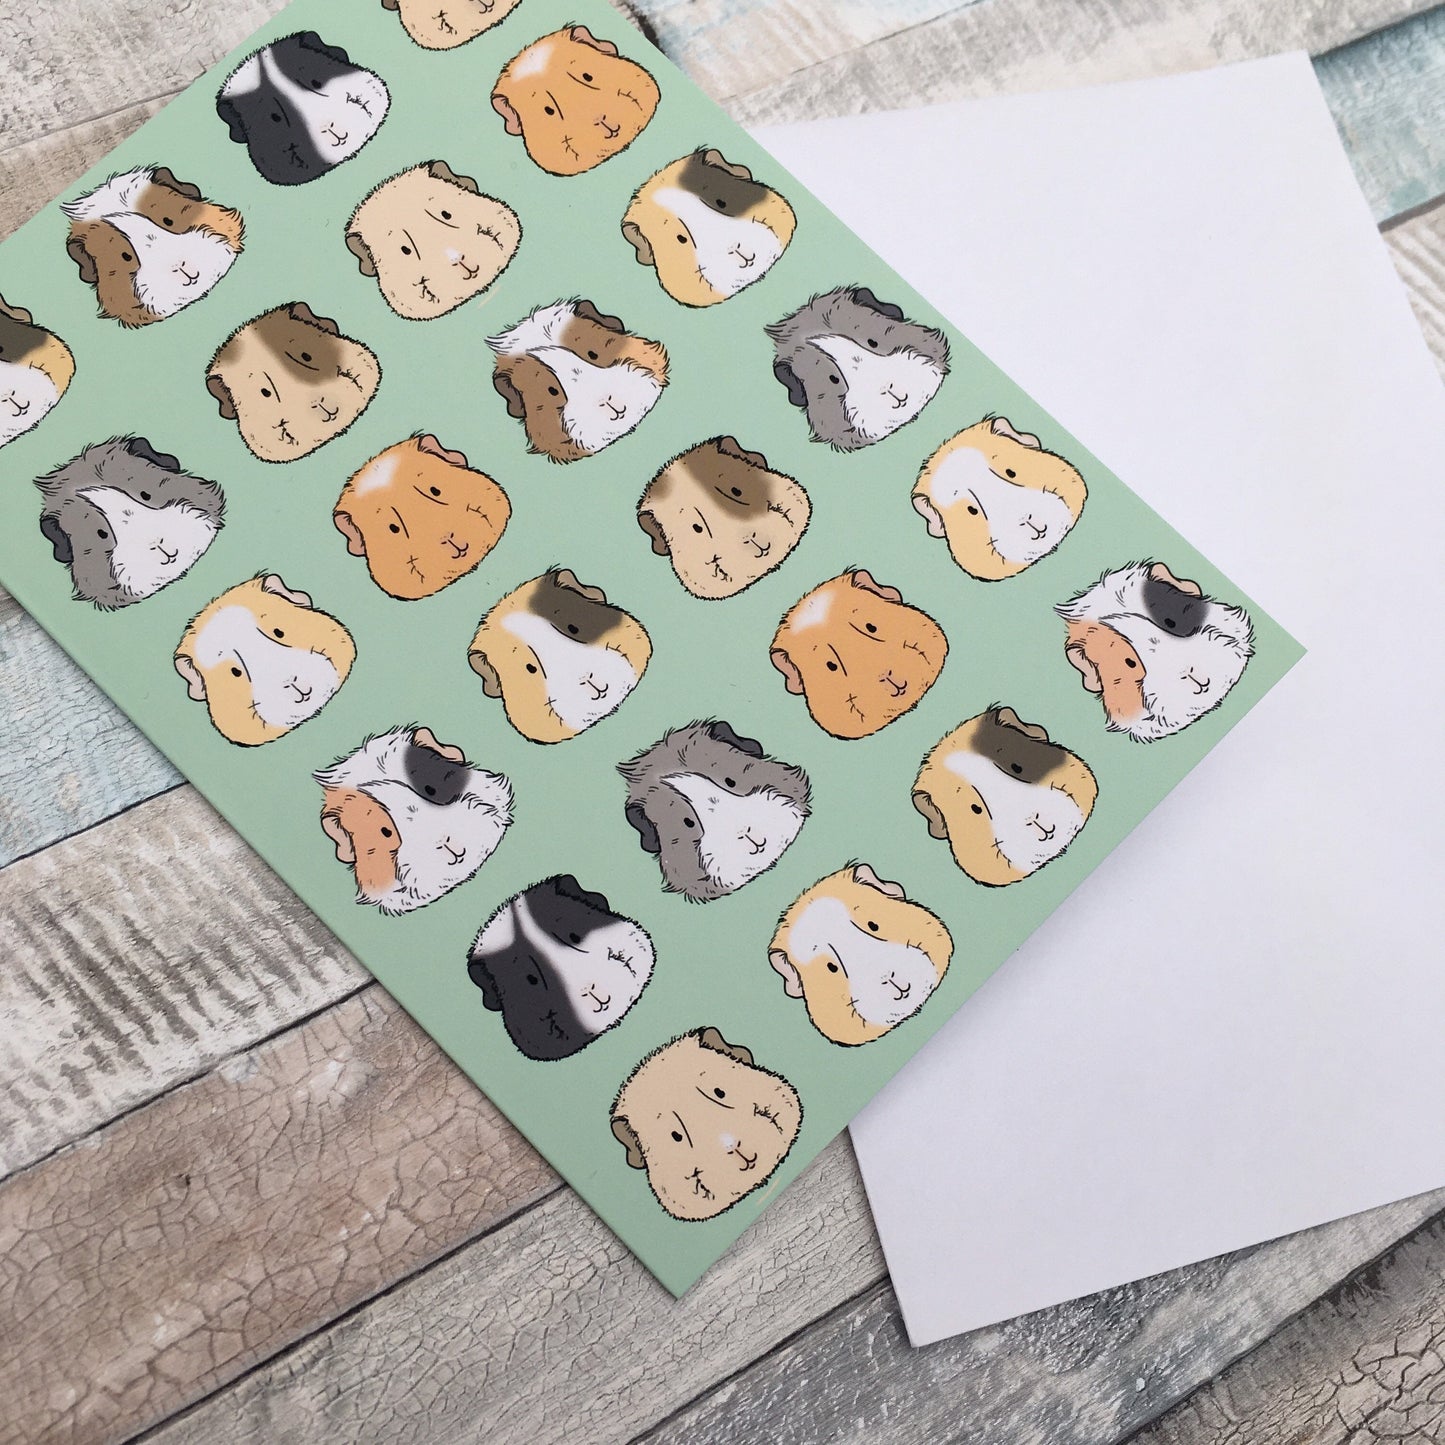 Guinea Pig Faces A6 Blank Greeting Card with White Envelope, Any Occasion Animal Lover Card, Guinea Pig lover Birthday, Just For You Card